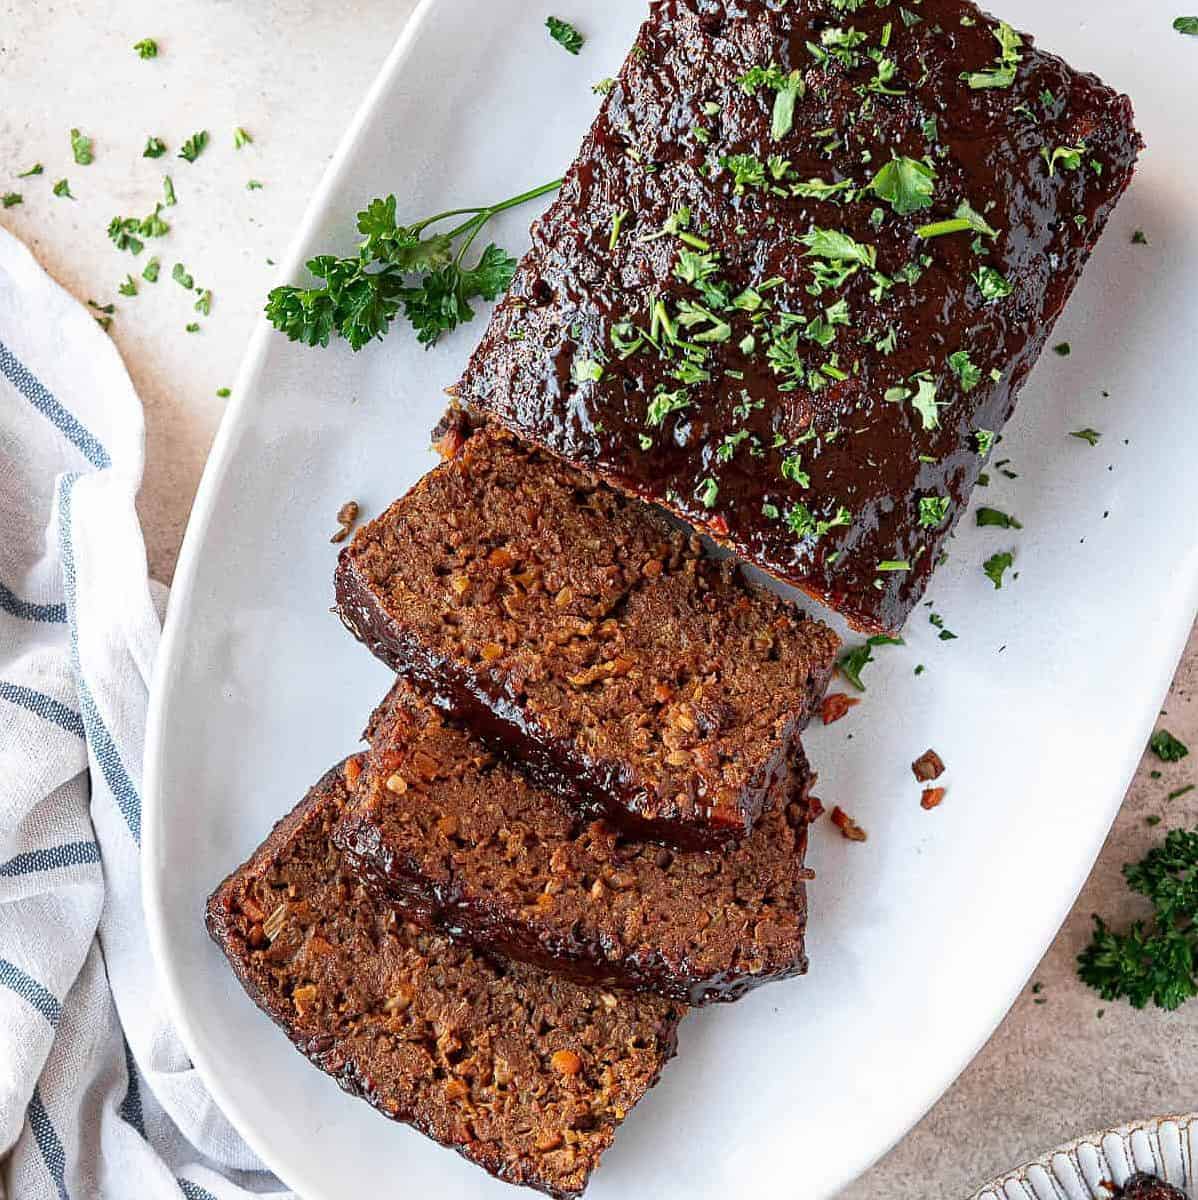  Your taste buds won't believe that this meatless-loaf is vegan.